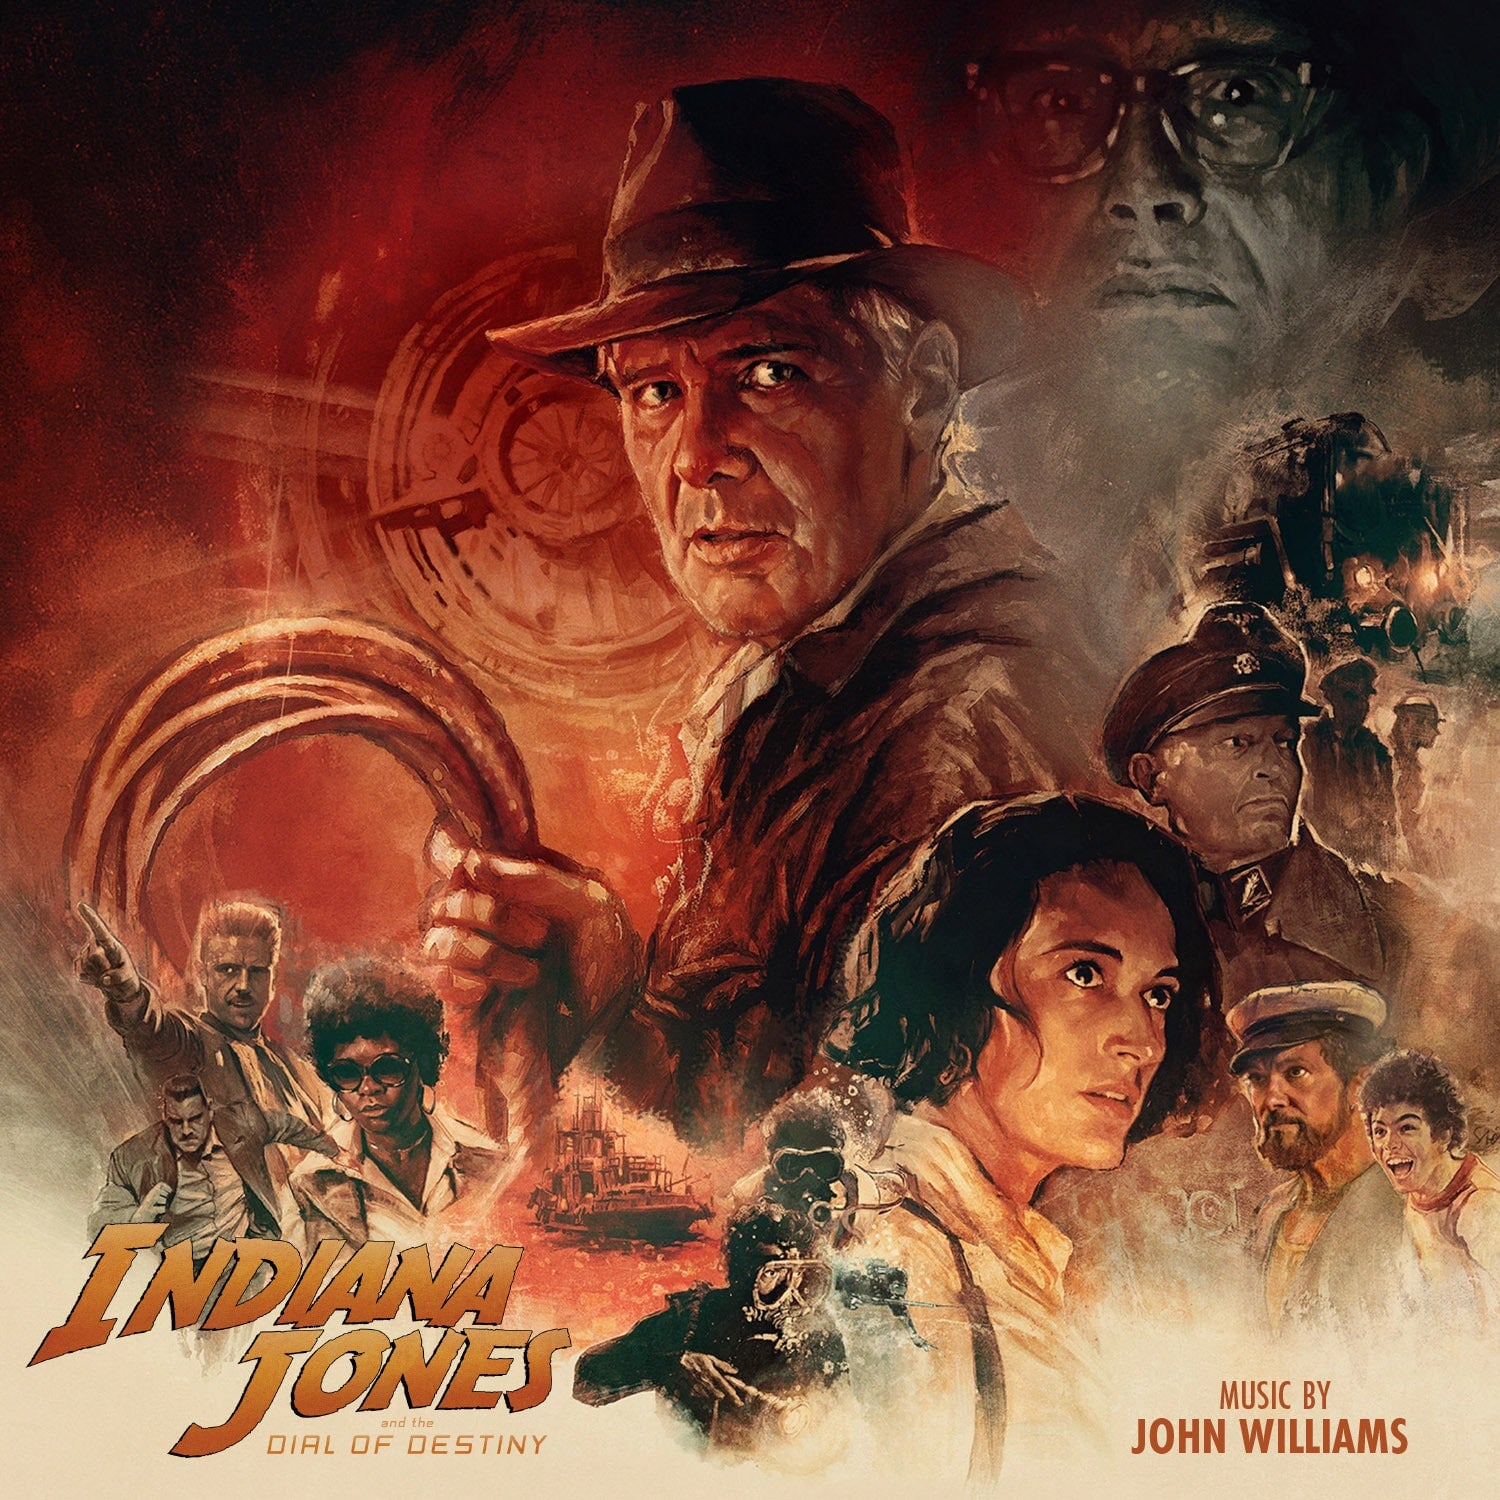 Indiana Jones And The Dial Of Destiny (Original Motion Picture Soundtrack) Music by John Williams (Vinyl 2LP)